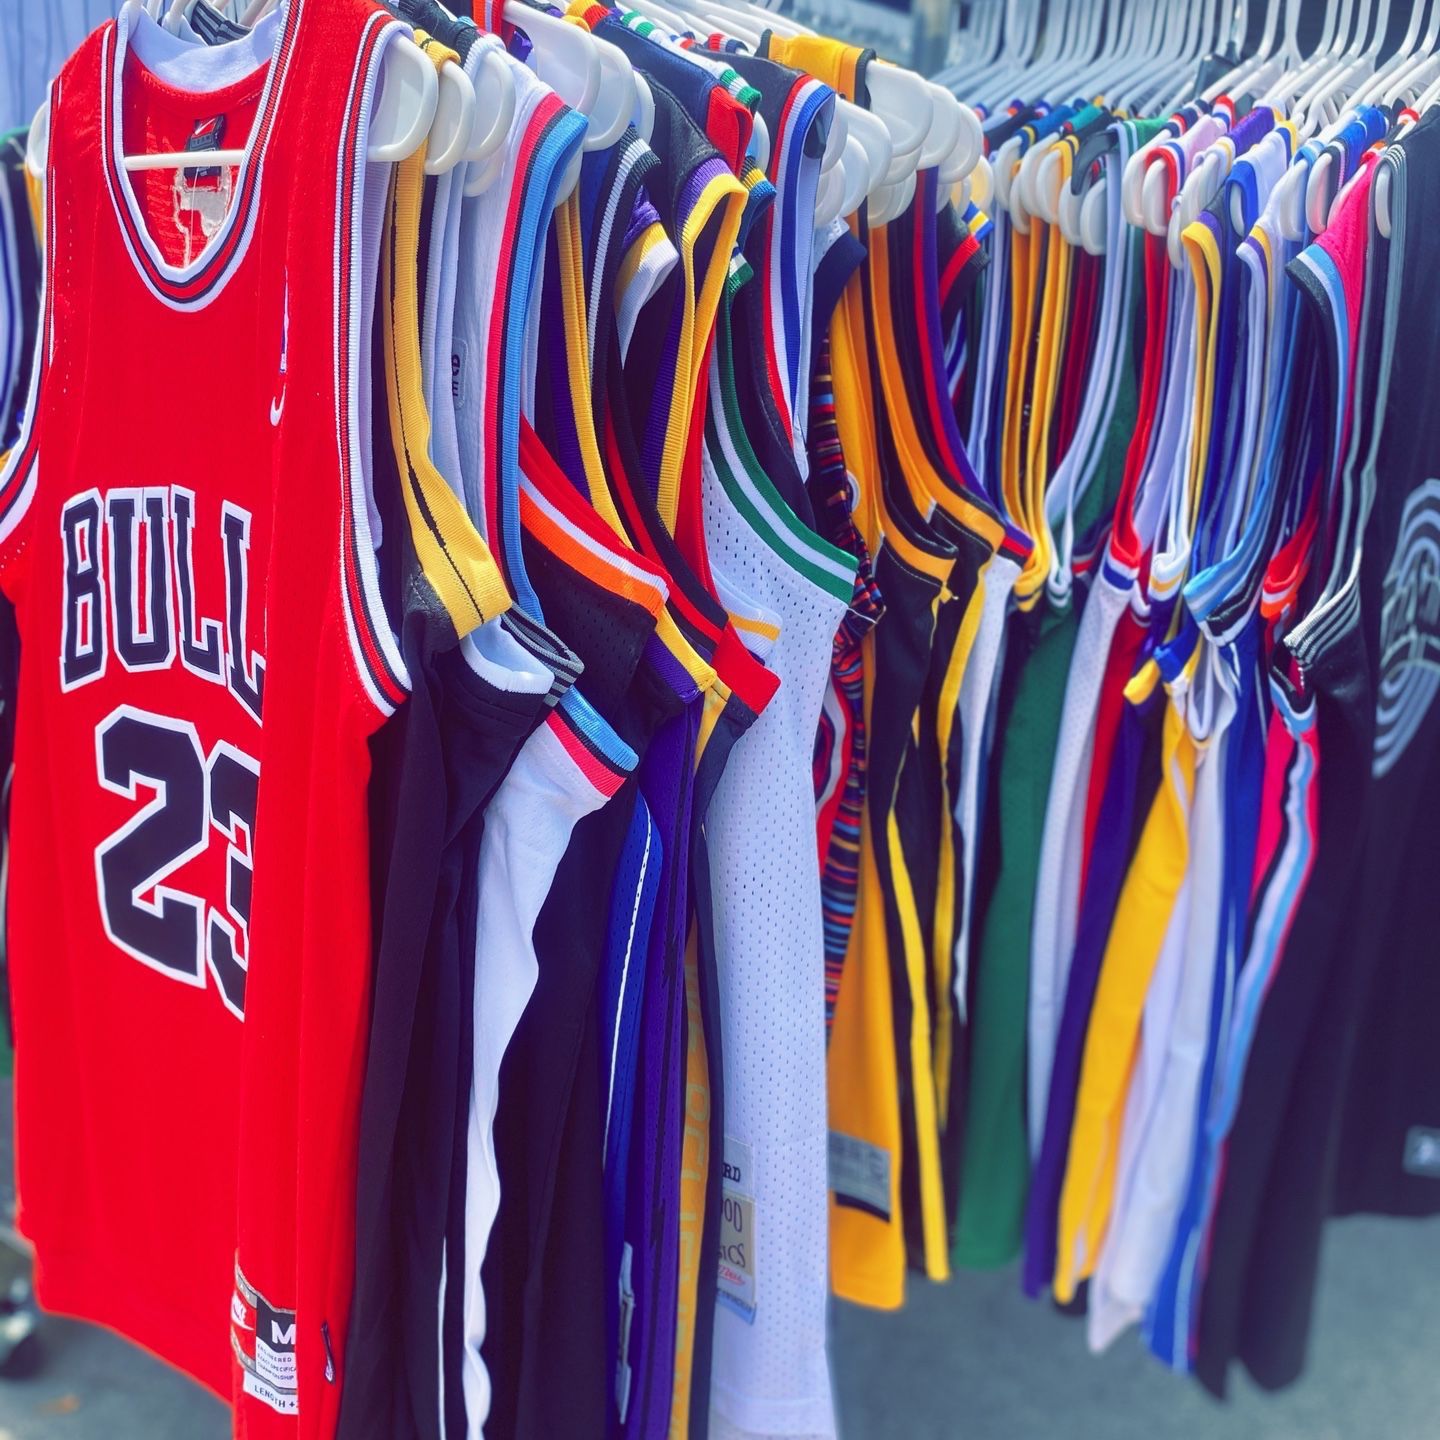 100% Authentic Michael Jordan Mitchell Ness 94 95 #45 Bulls Jersey Size 40  M Men for Sale in Miami, FL - OfferUp